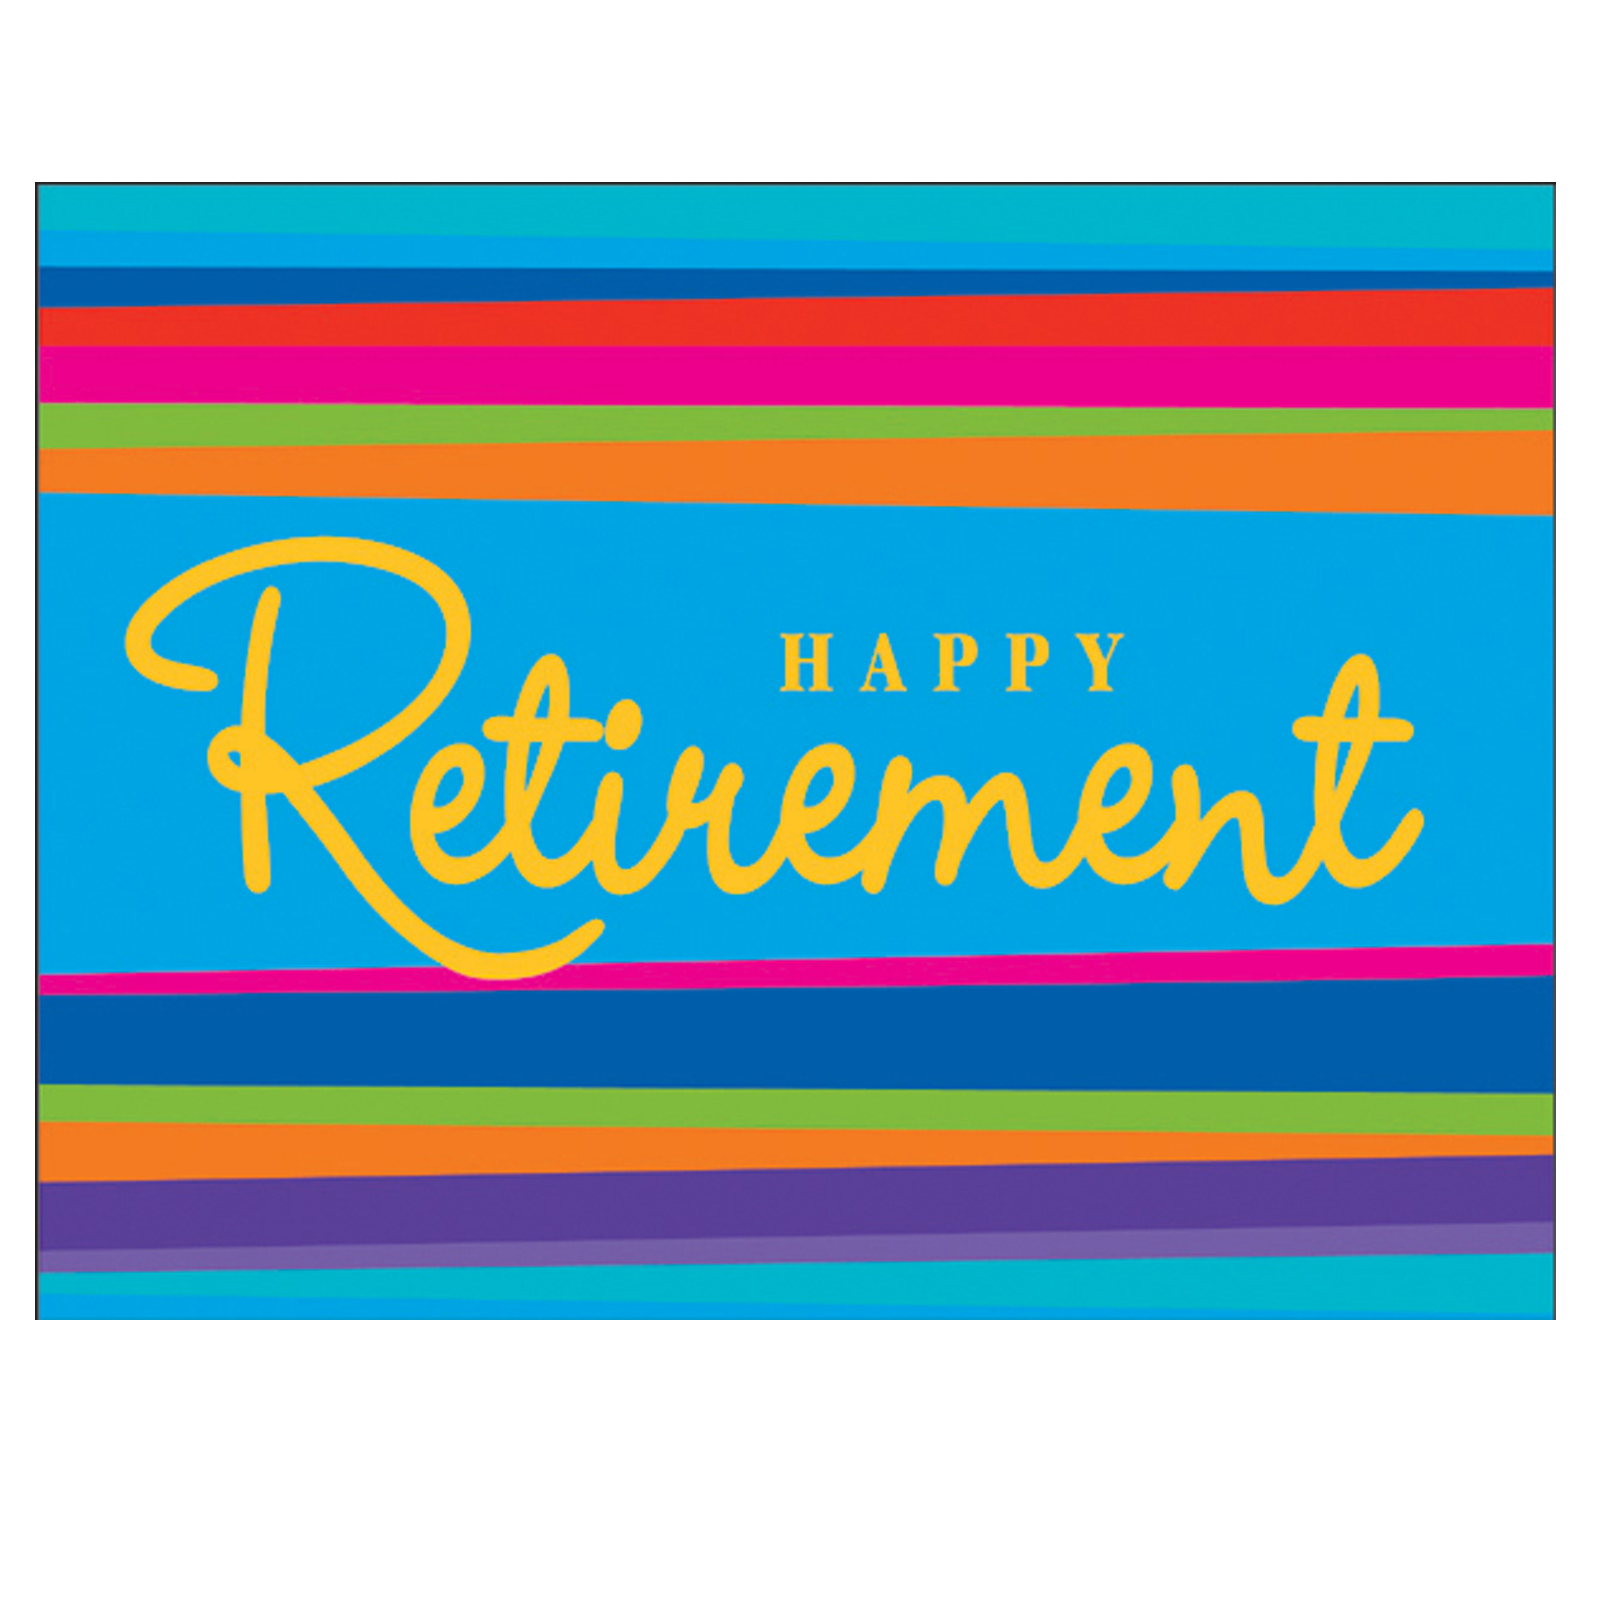 Free Happy Retirement Images Free download on ClipArtMag